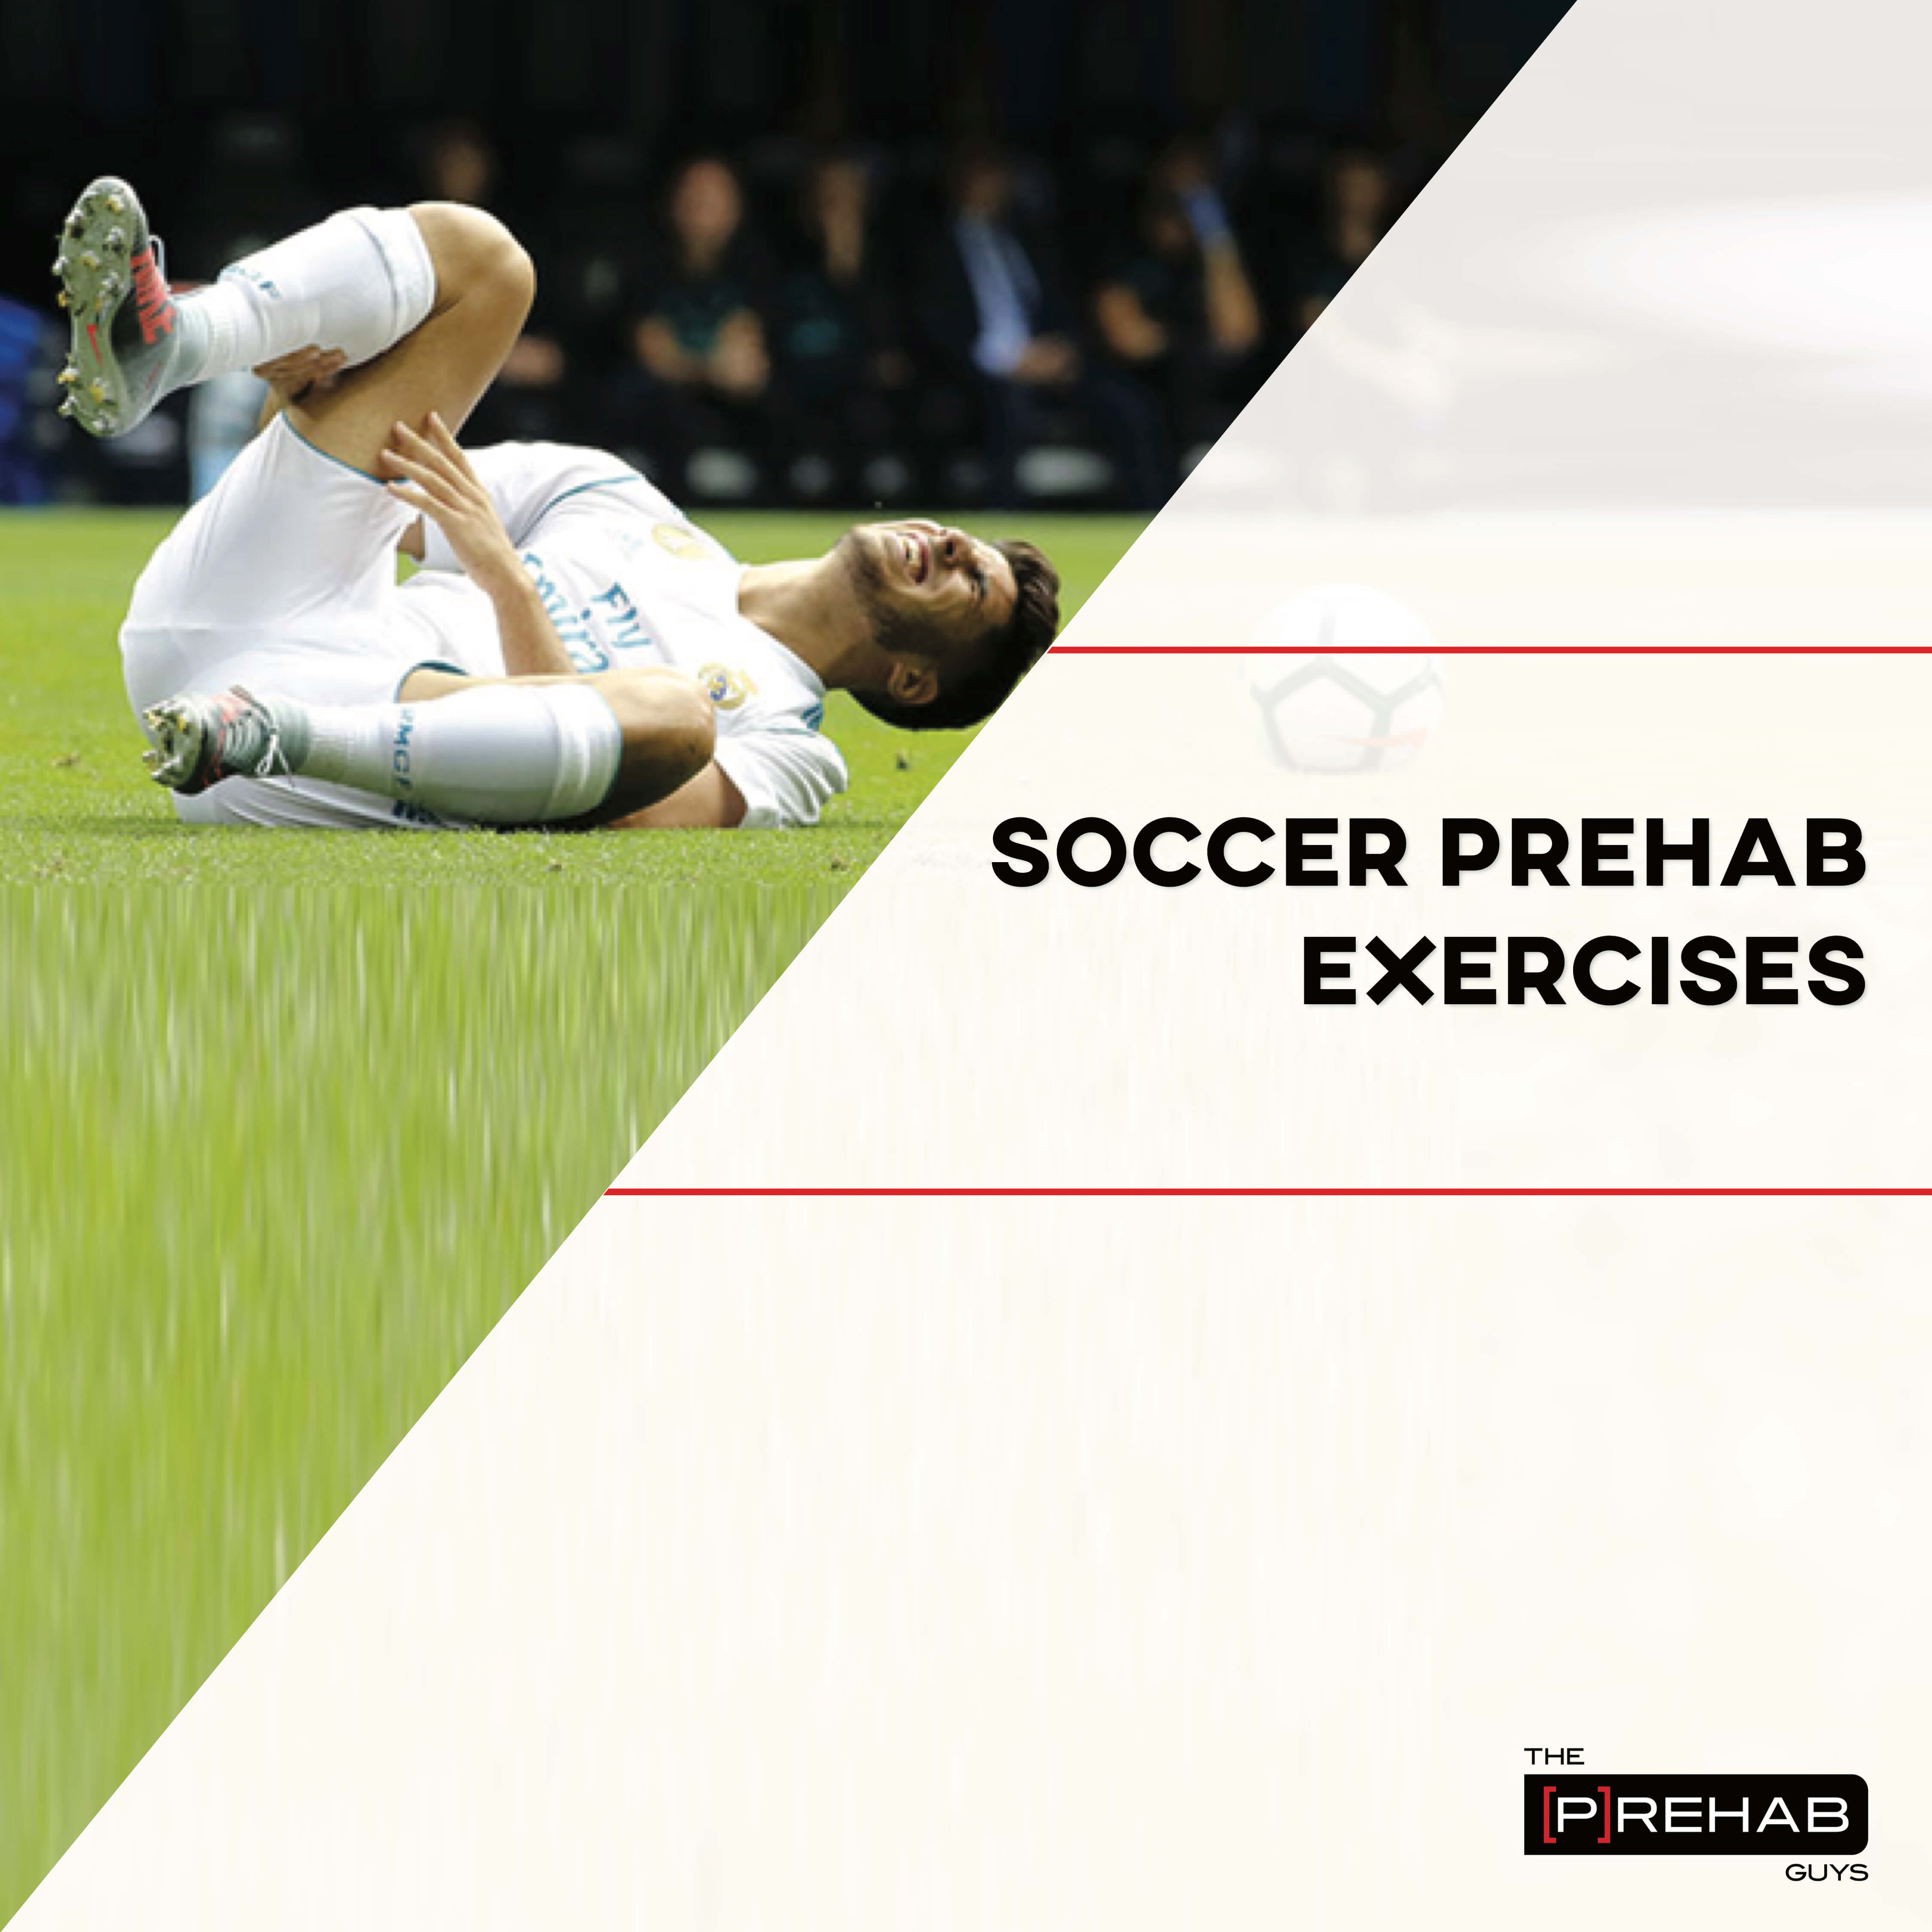 Soccer Prehab Exercises for the 3 Most Common Soccer Injuries